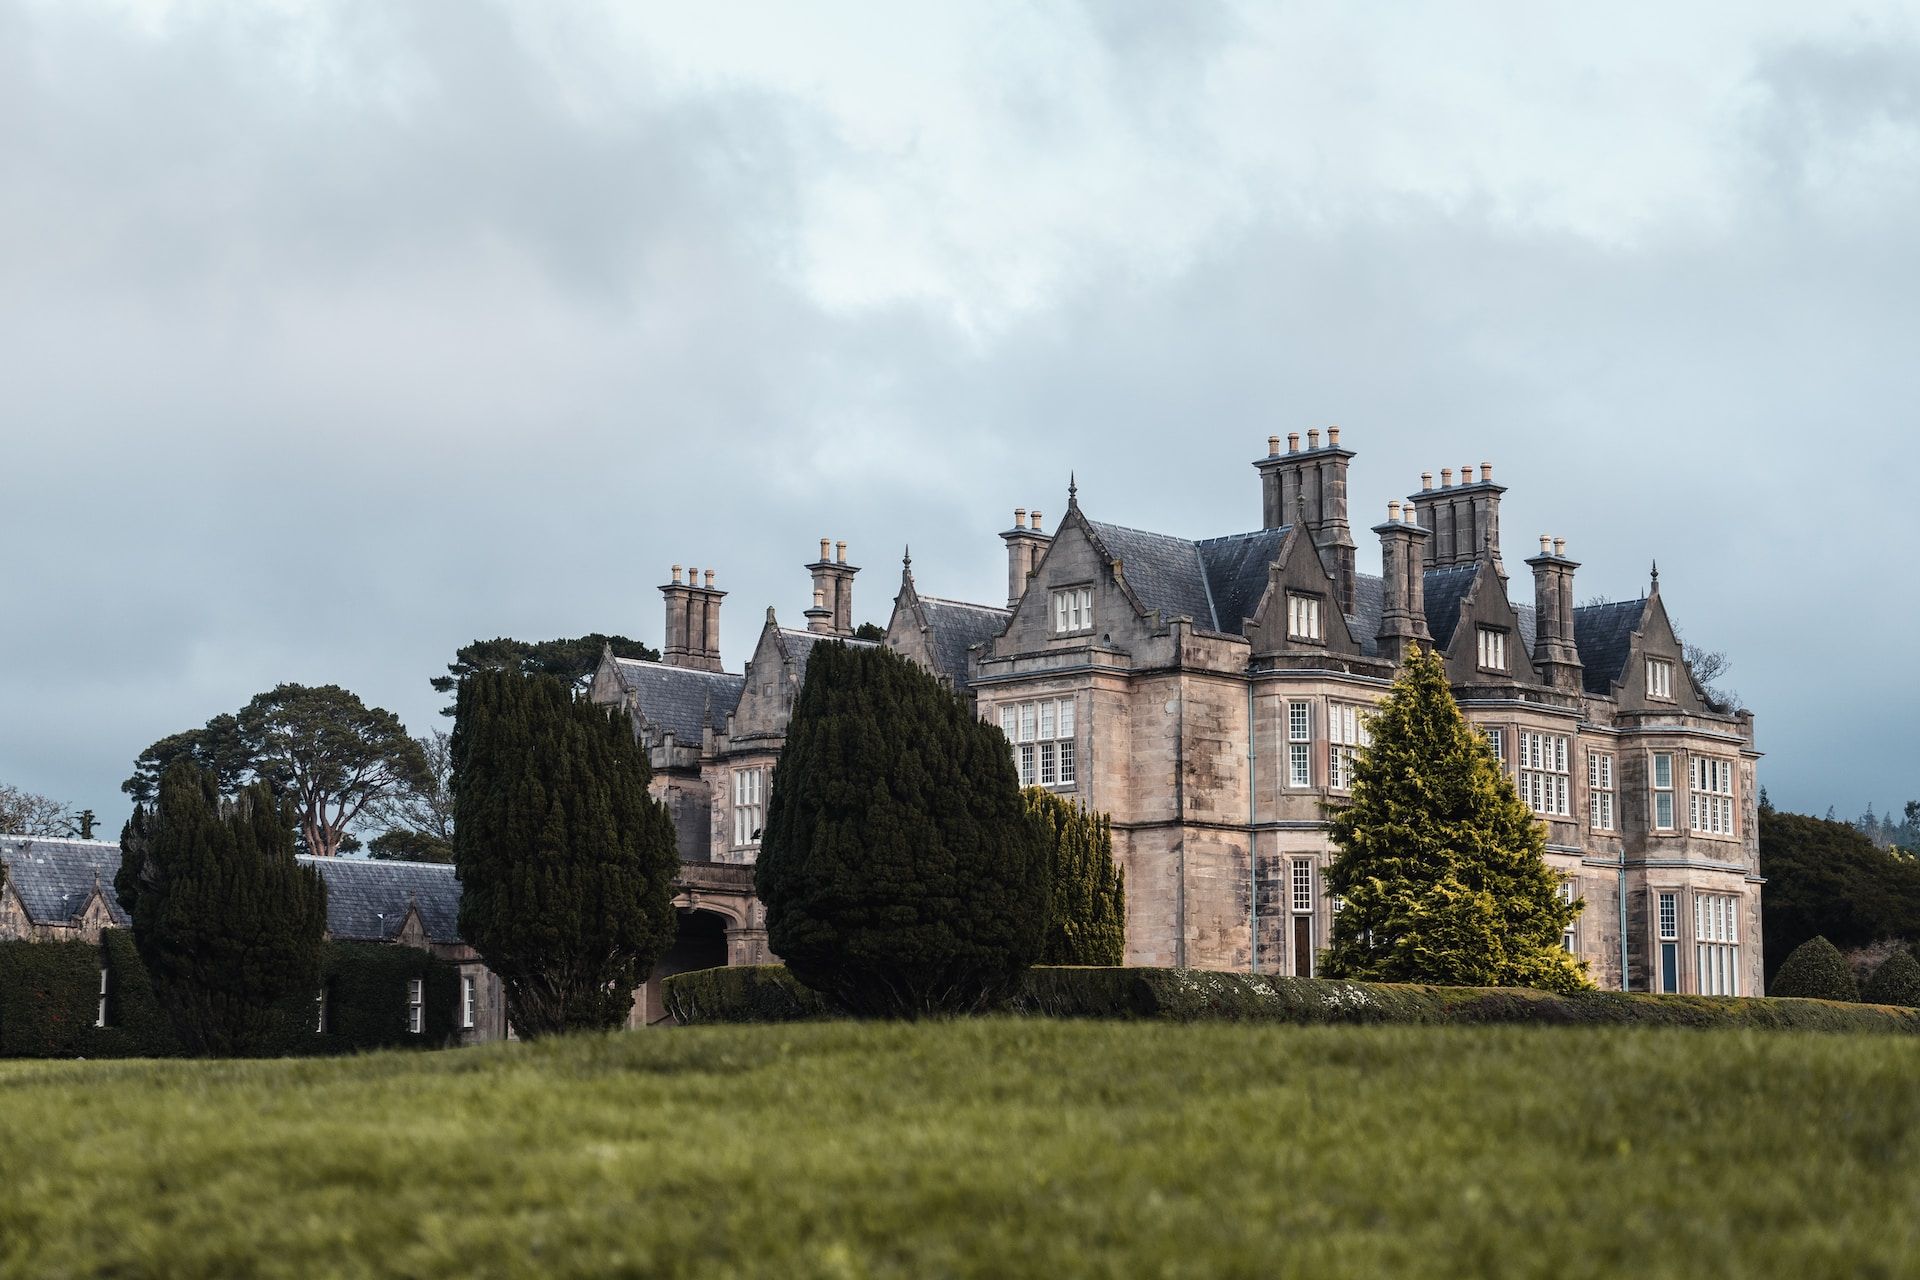 The incredible Muckross House in Ireland